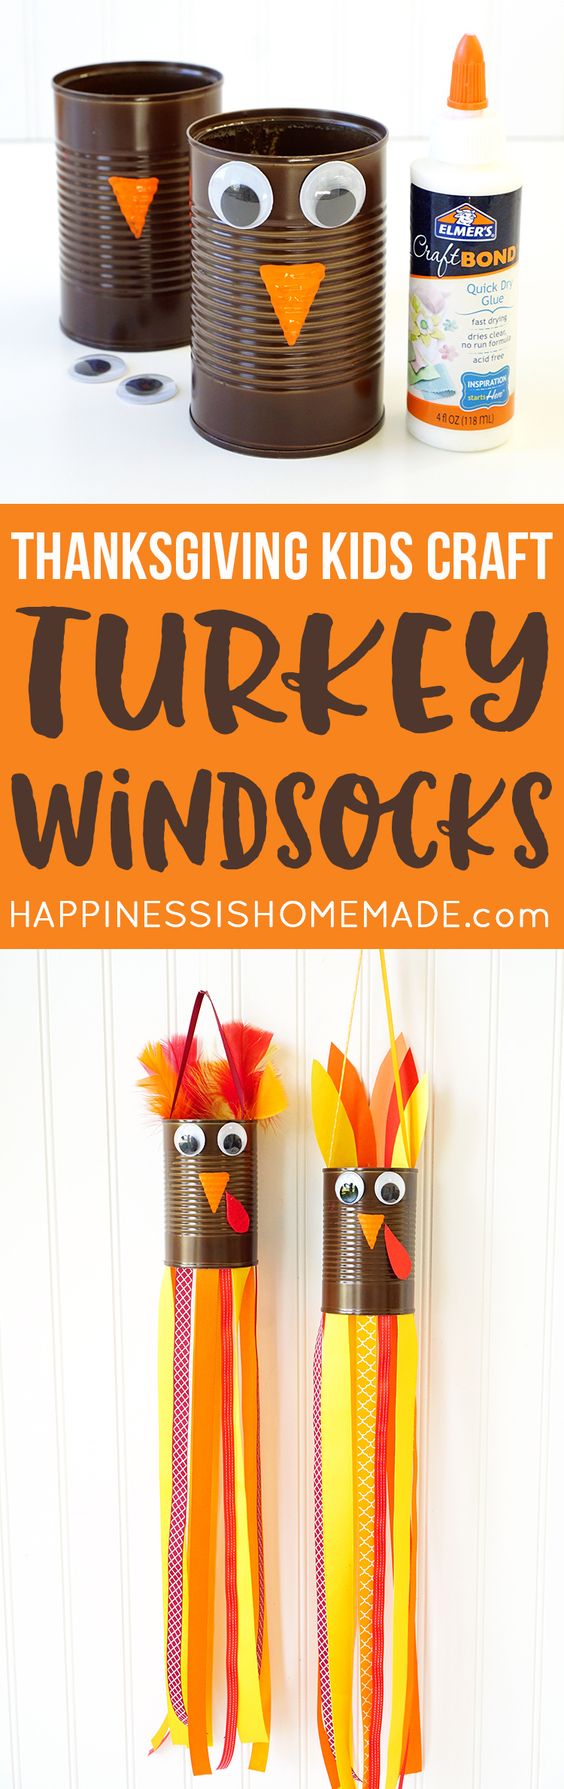 Turkey Windsocks Made From A Recycled Tin Can. 